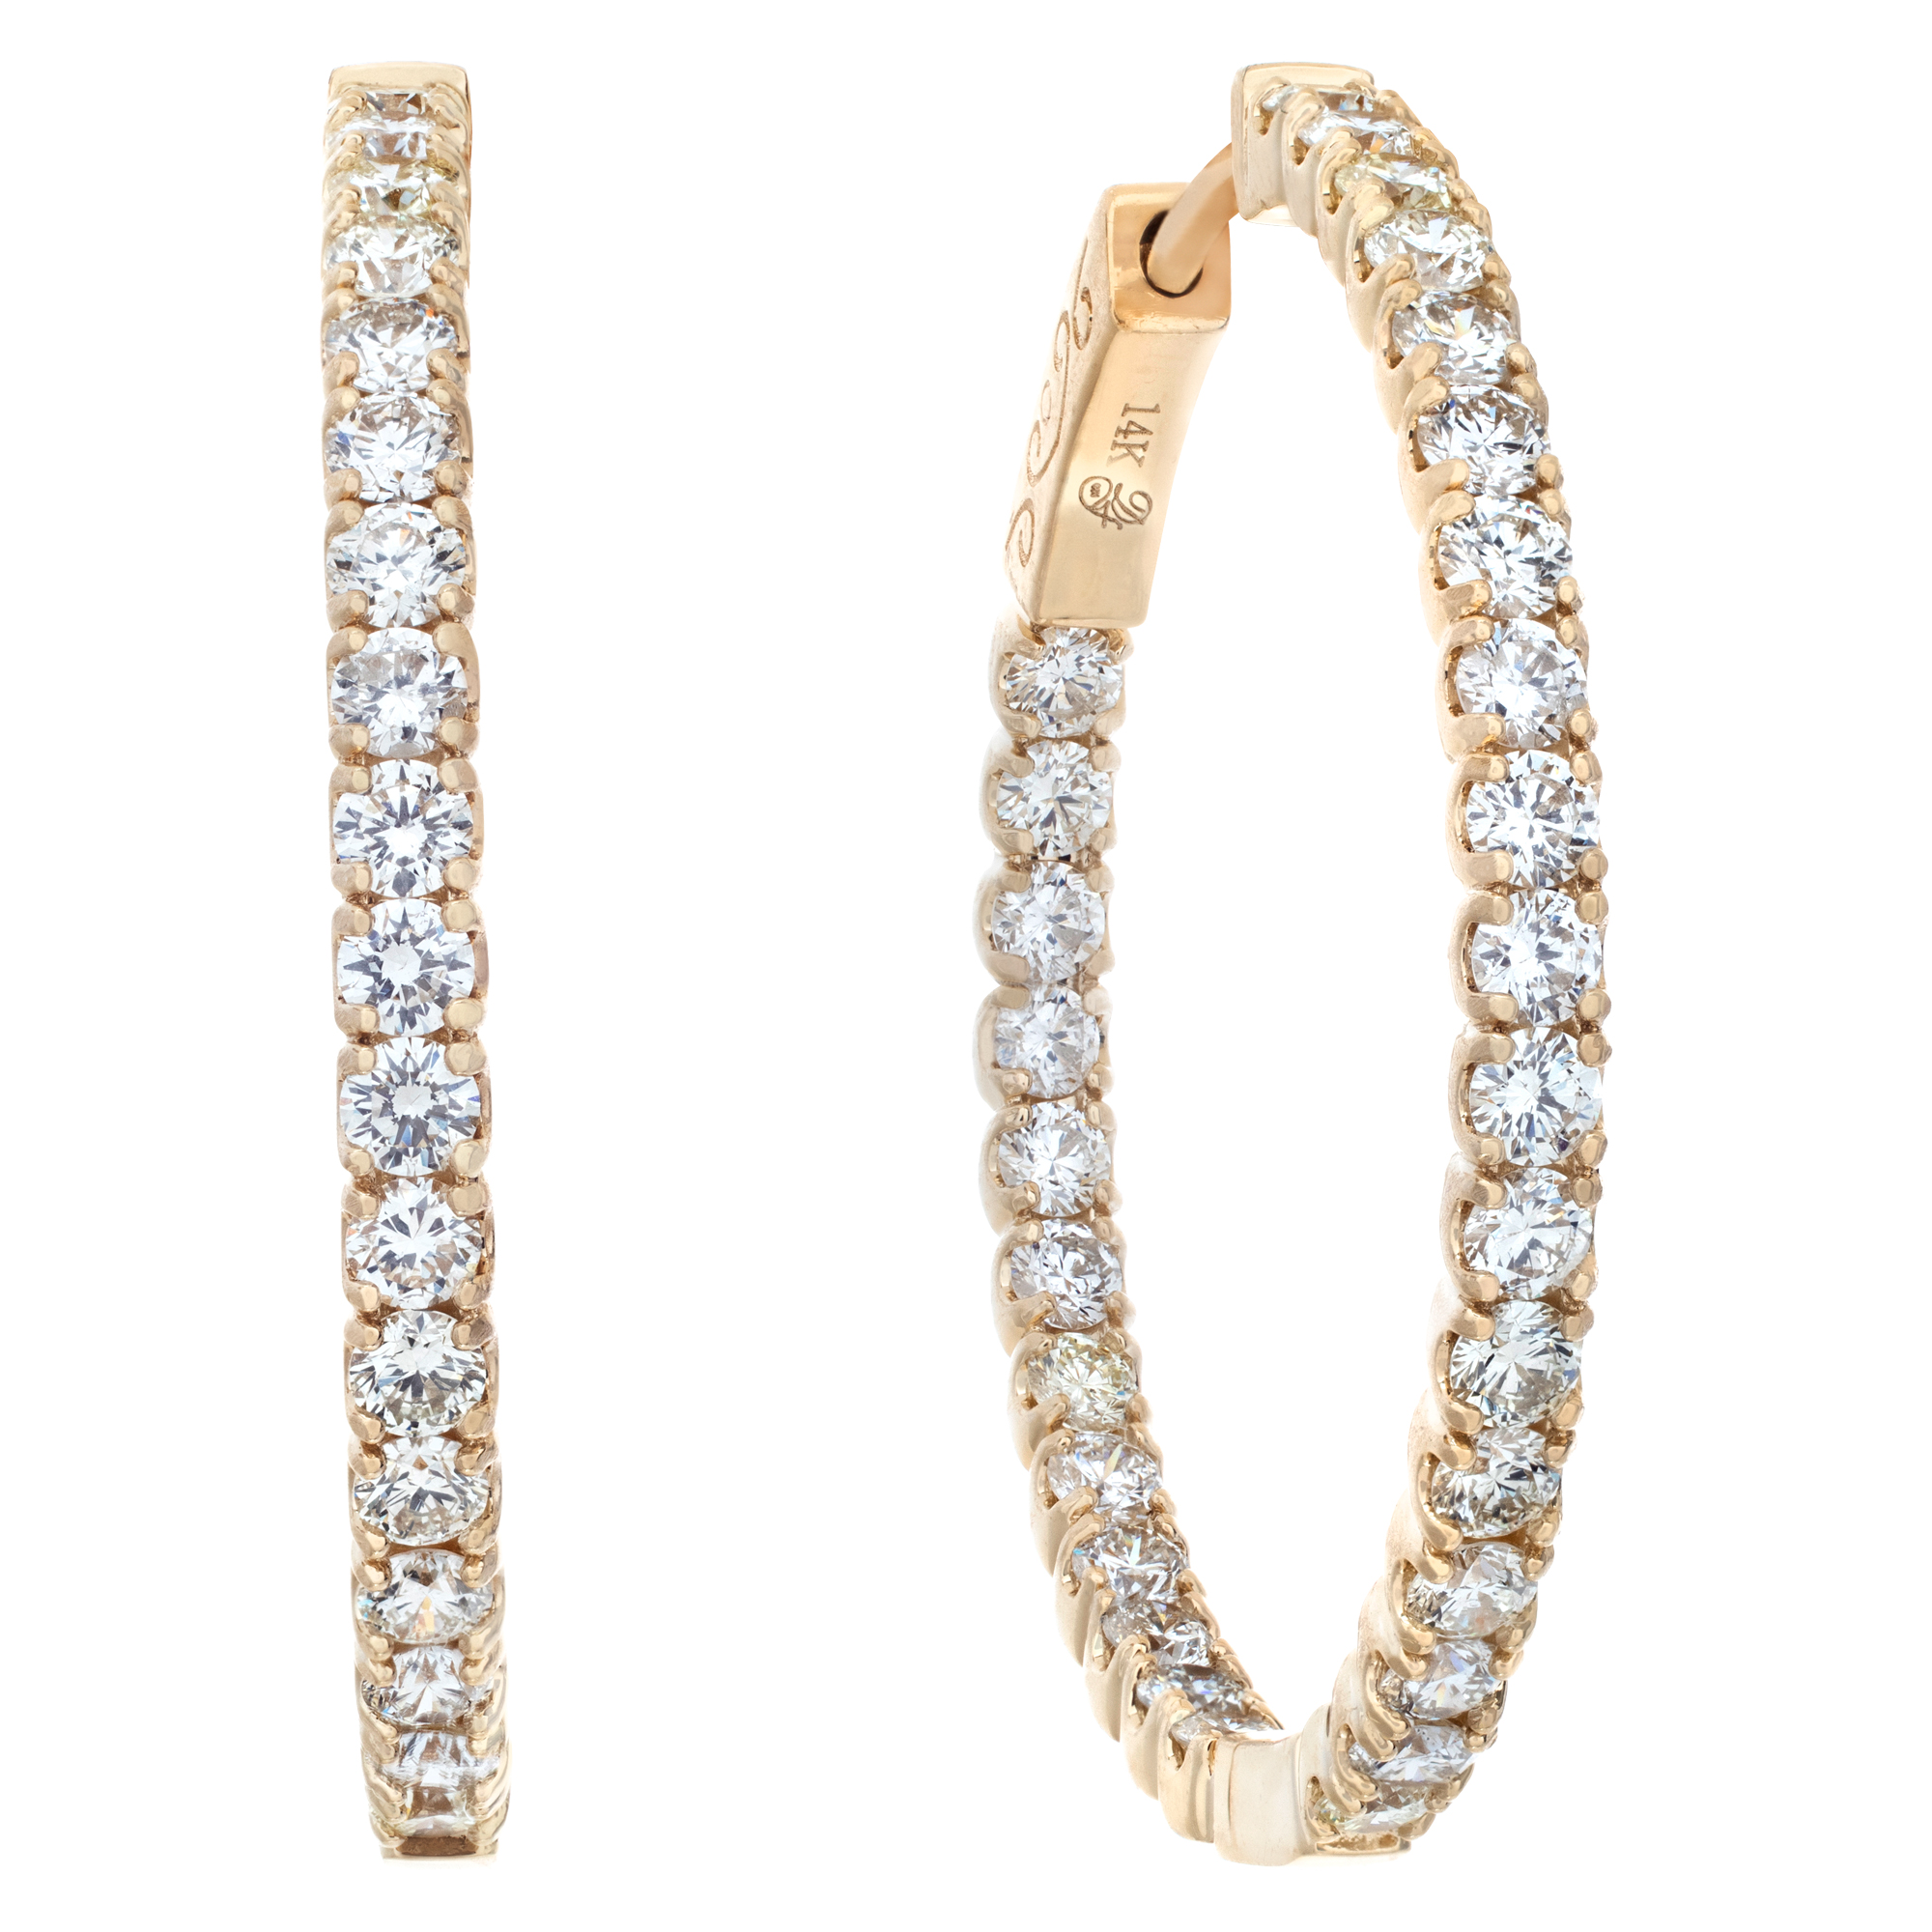 Diamond hoops in 14k yellow gold with 2.55 carats in diamonds image 1